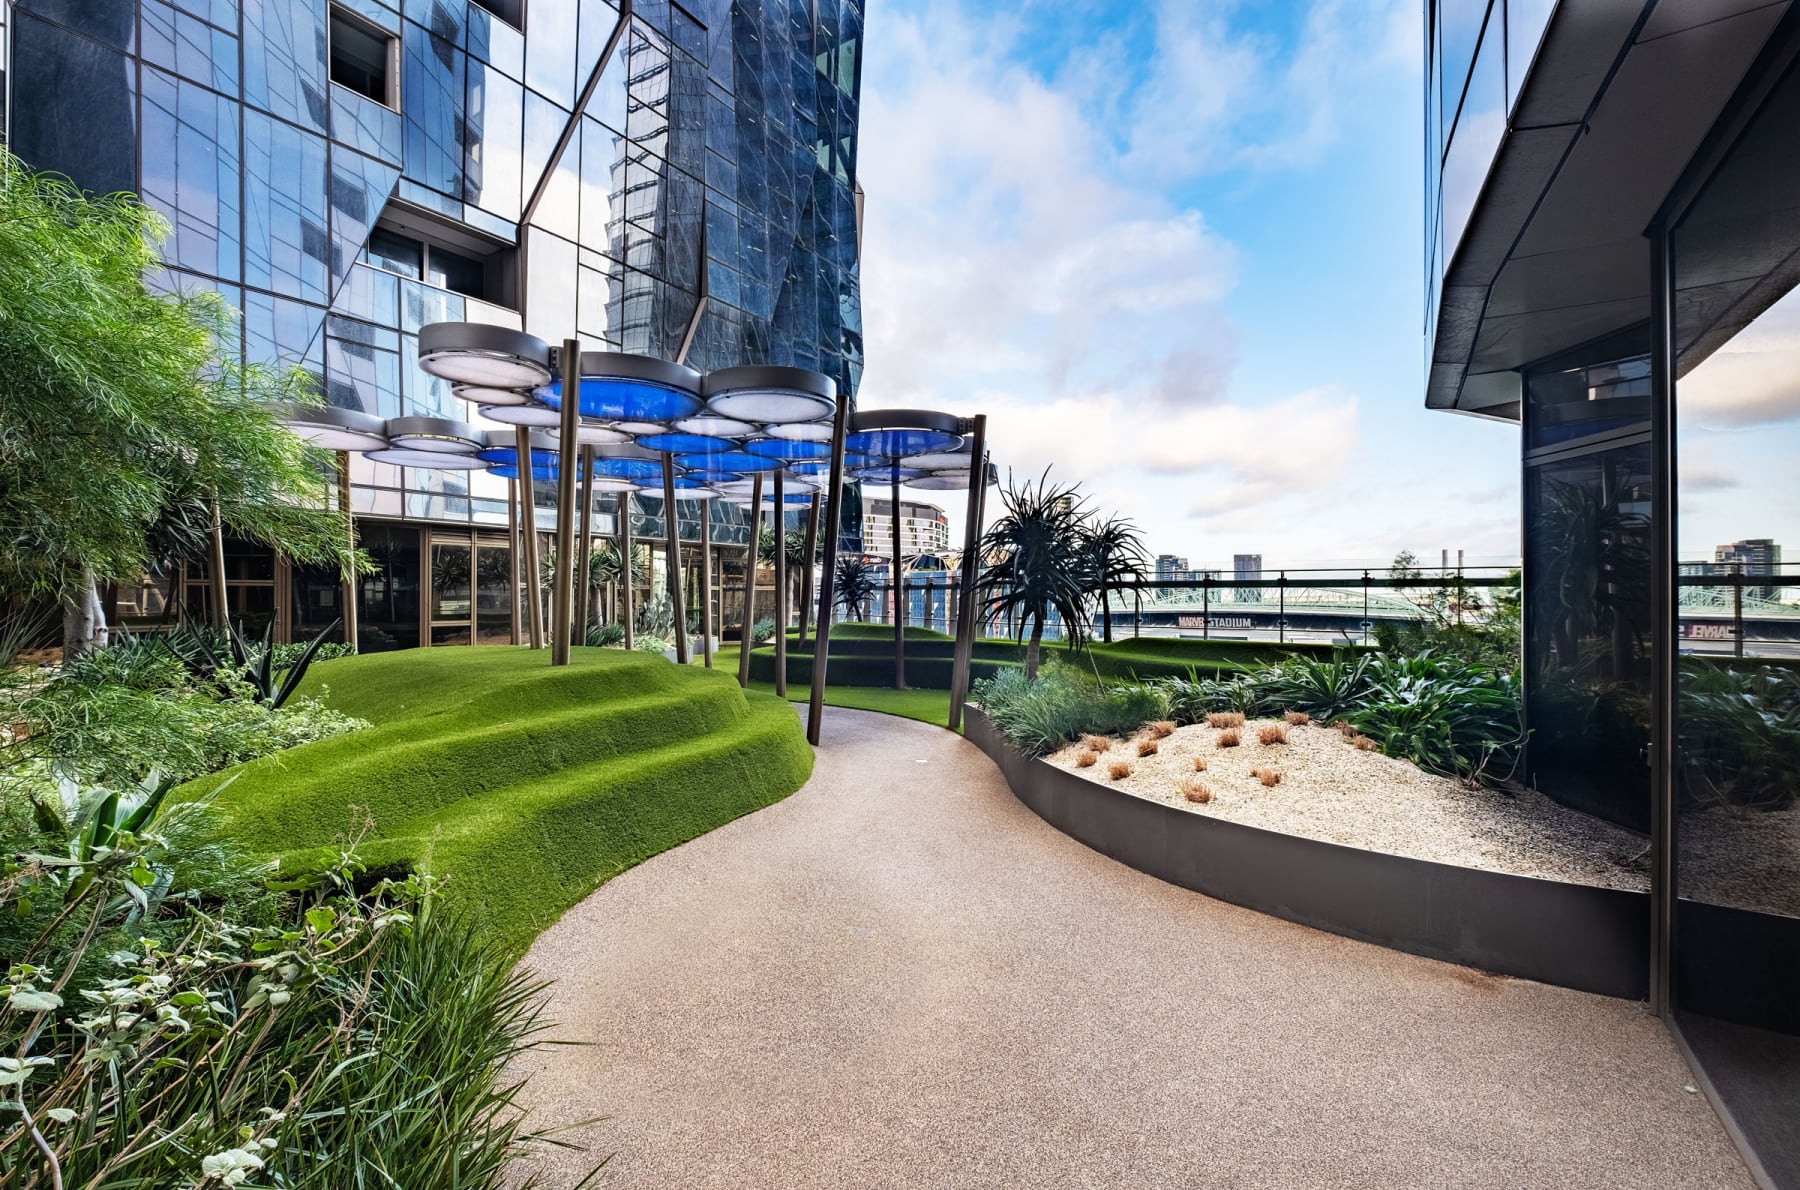 An outdoor rooftop terrace with BBQ facilities